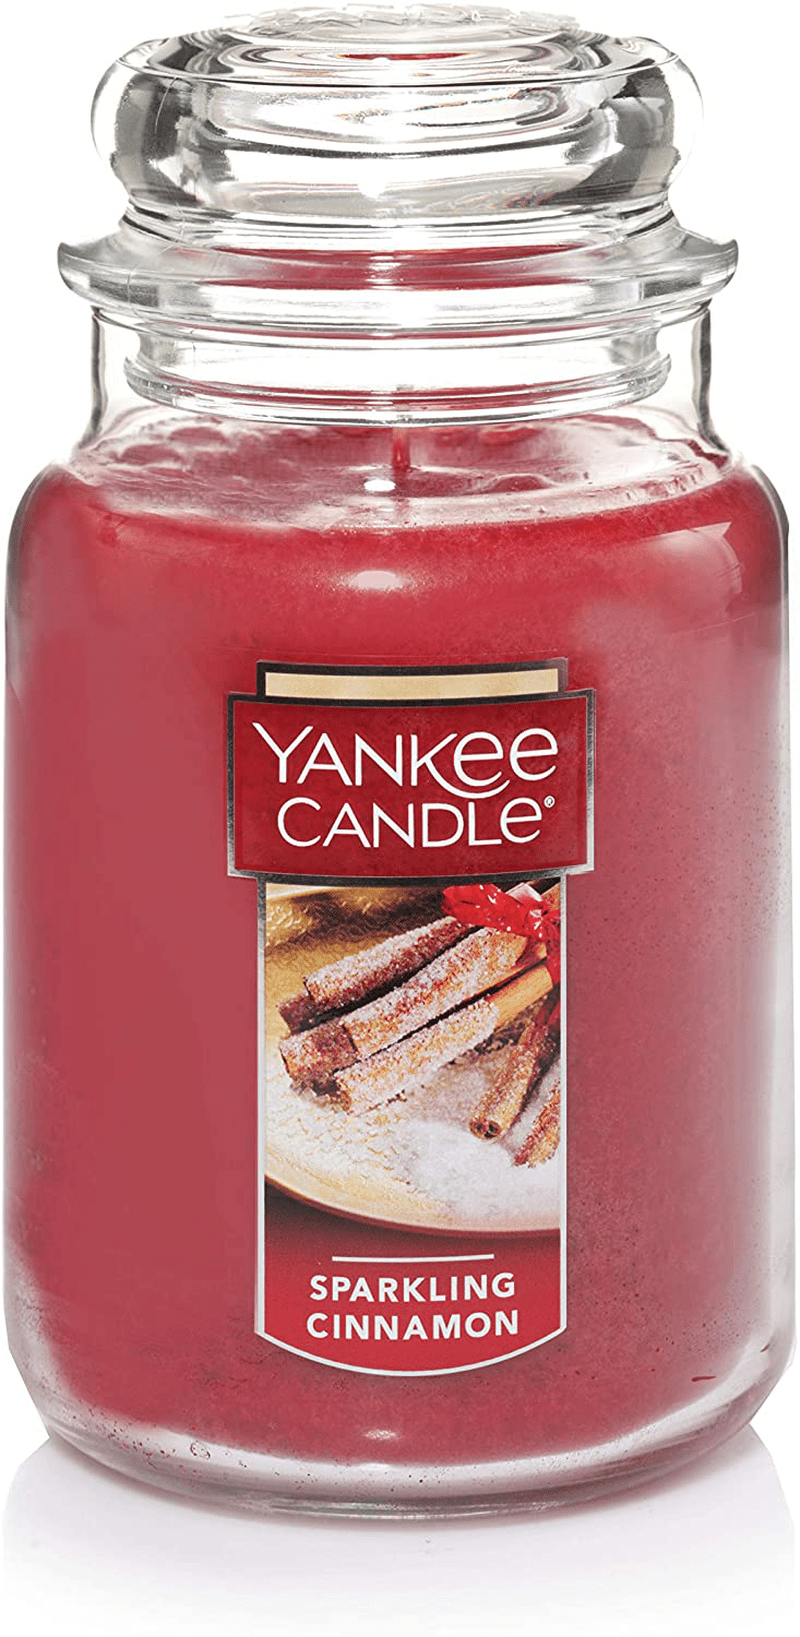 Yankee Candle Large Jar Candle Home Sweet Home Home & Garden > Decor > Home Fragrances > Candles Yankee Candle Sparkling Cinnamon Large Jar 